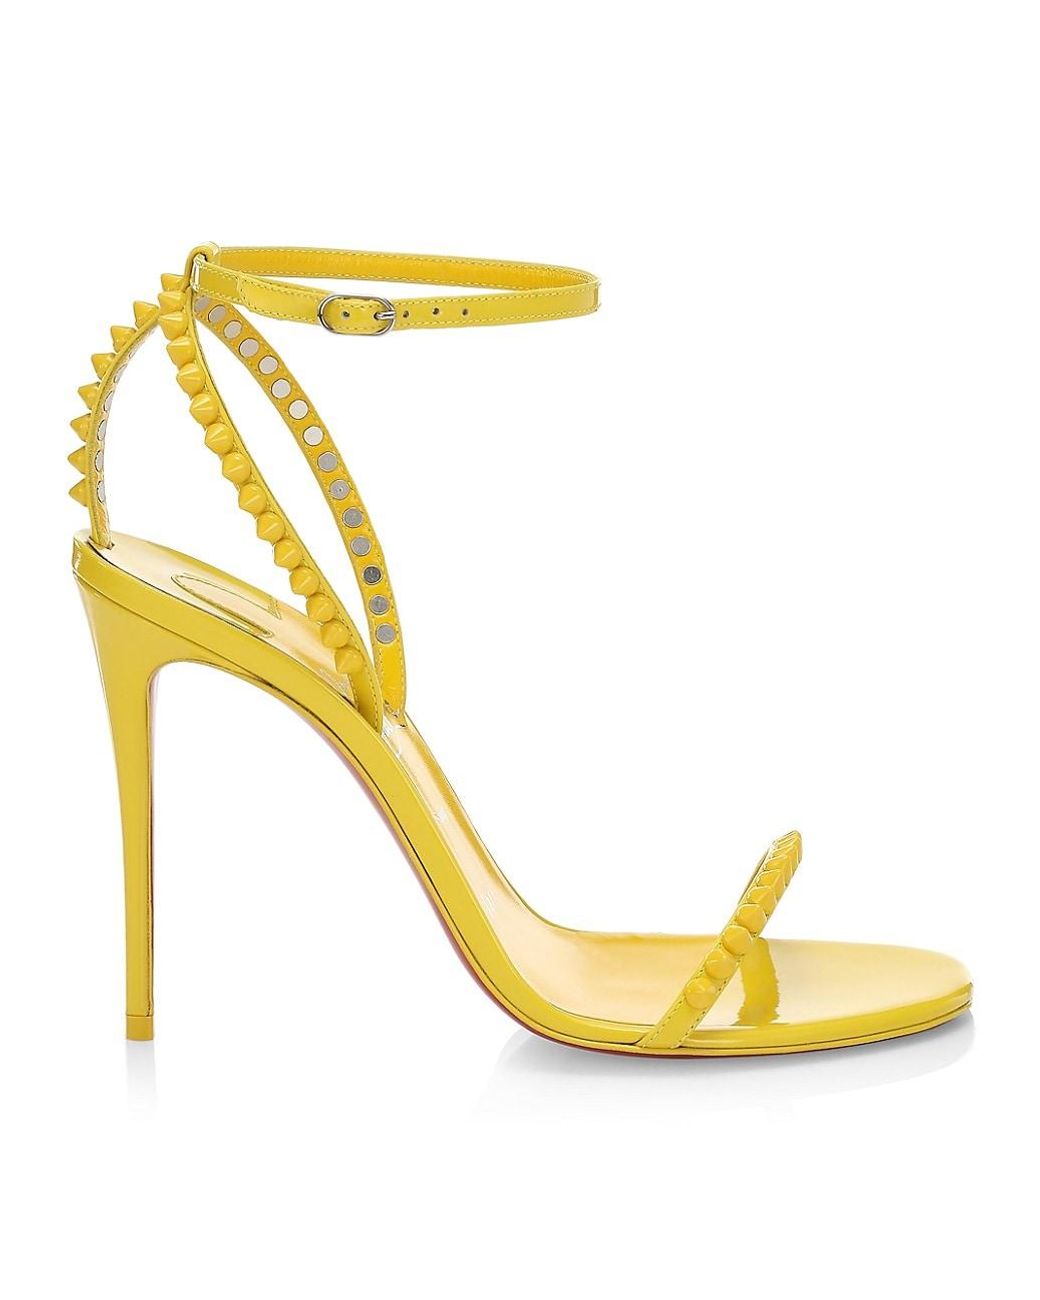 Christian Louboutin So Me Spike 100 Patent Leather Sandals in Metallic ...